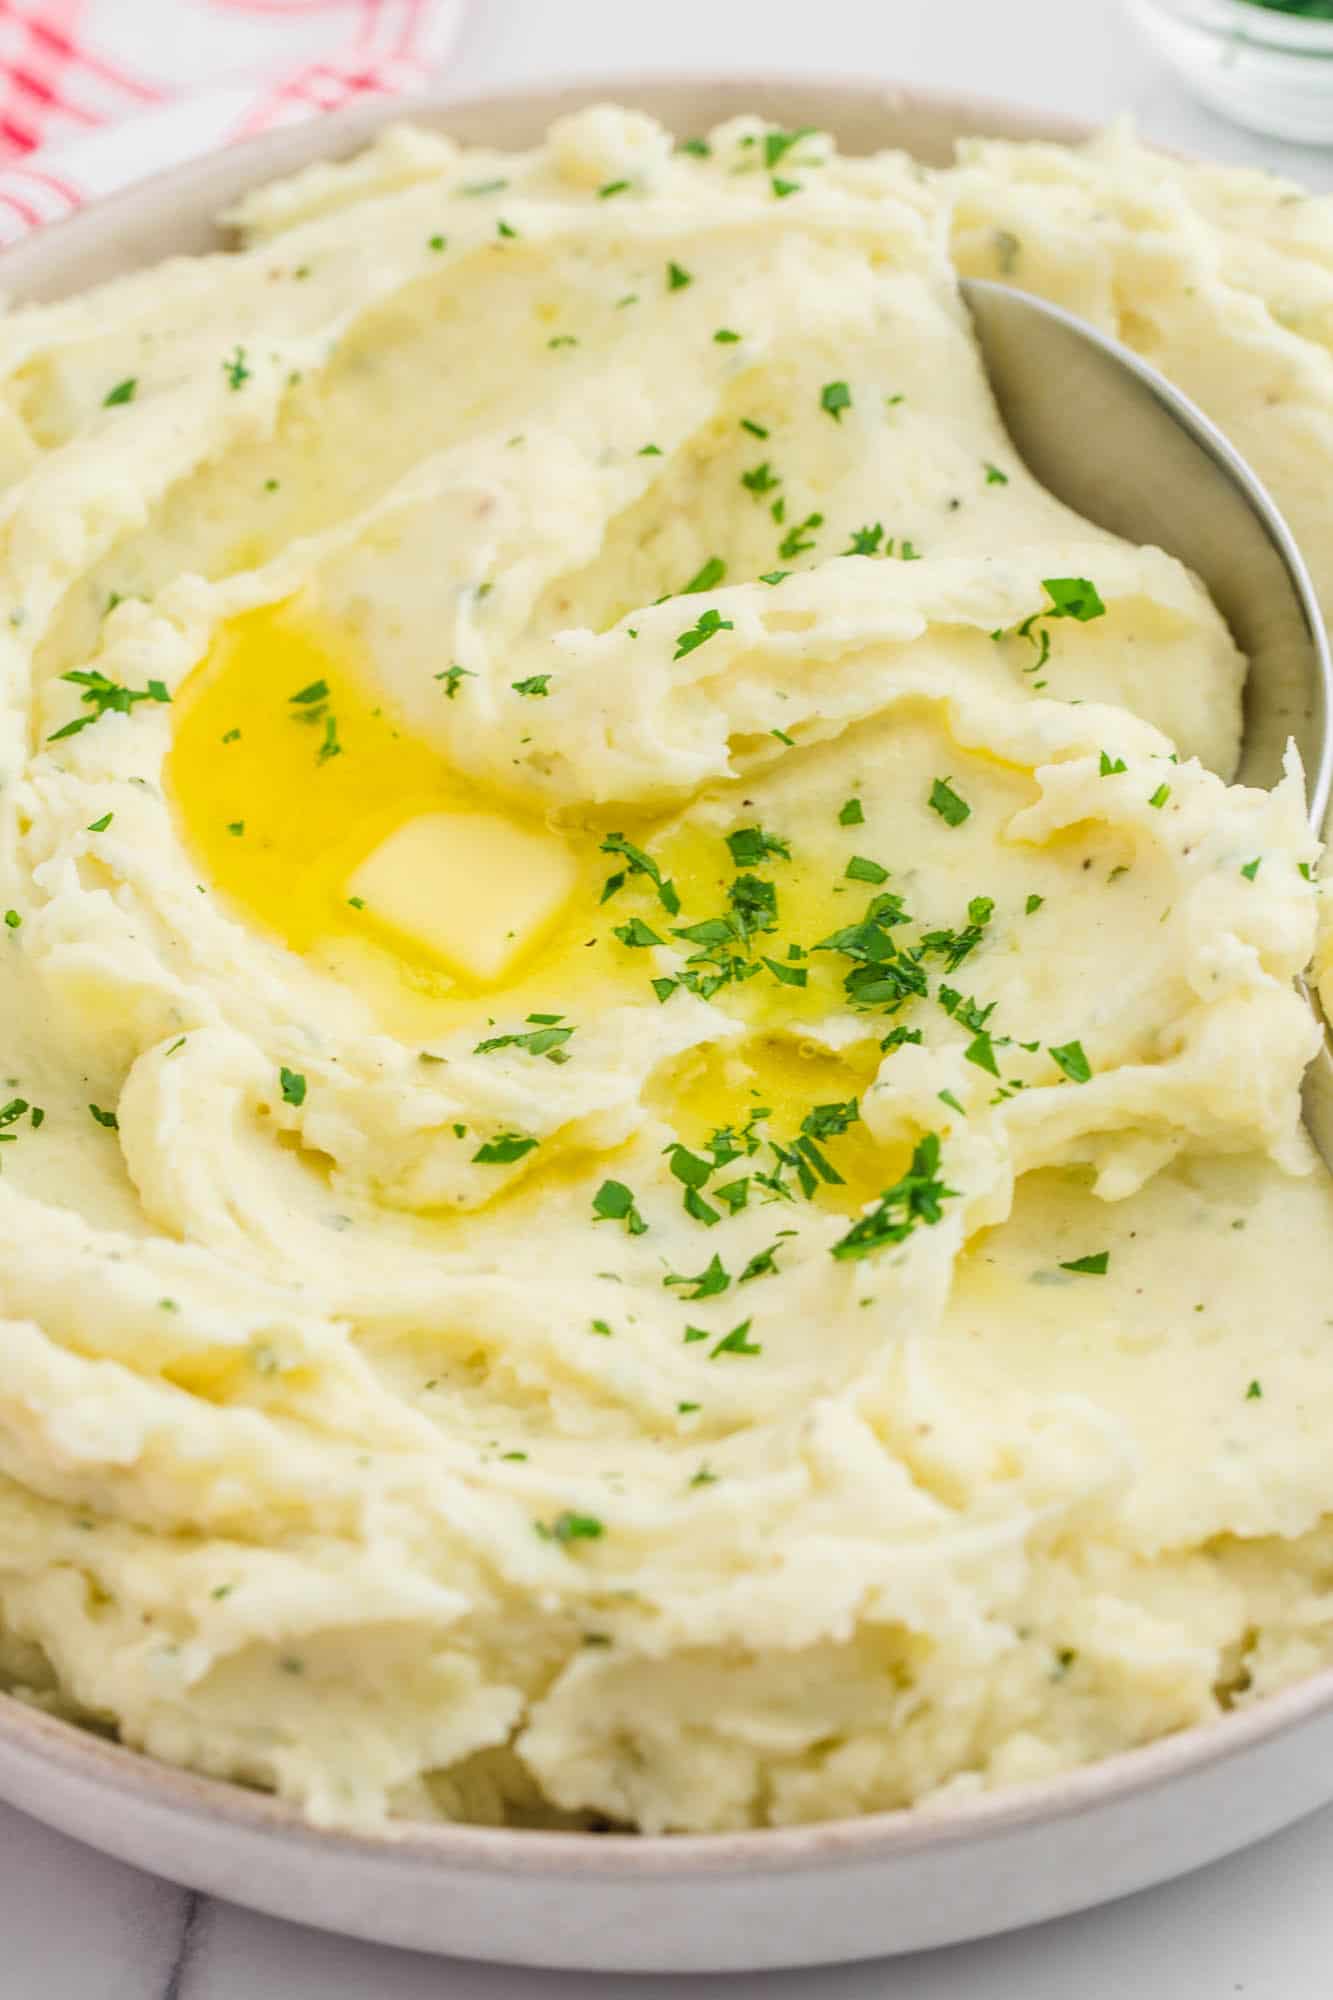 Creamy mashed potatoes served in a semi shallow dish